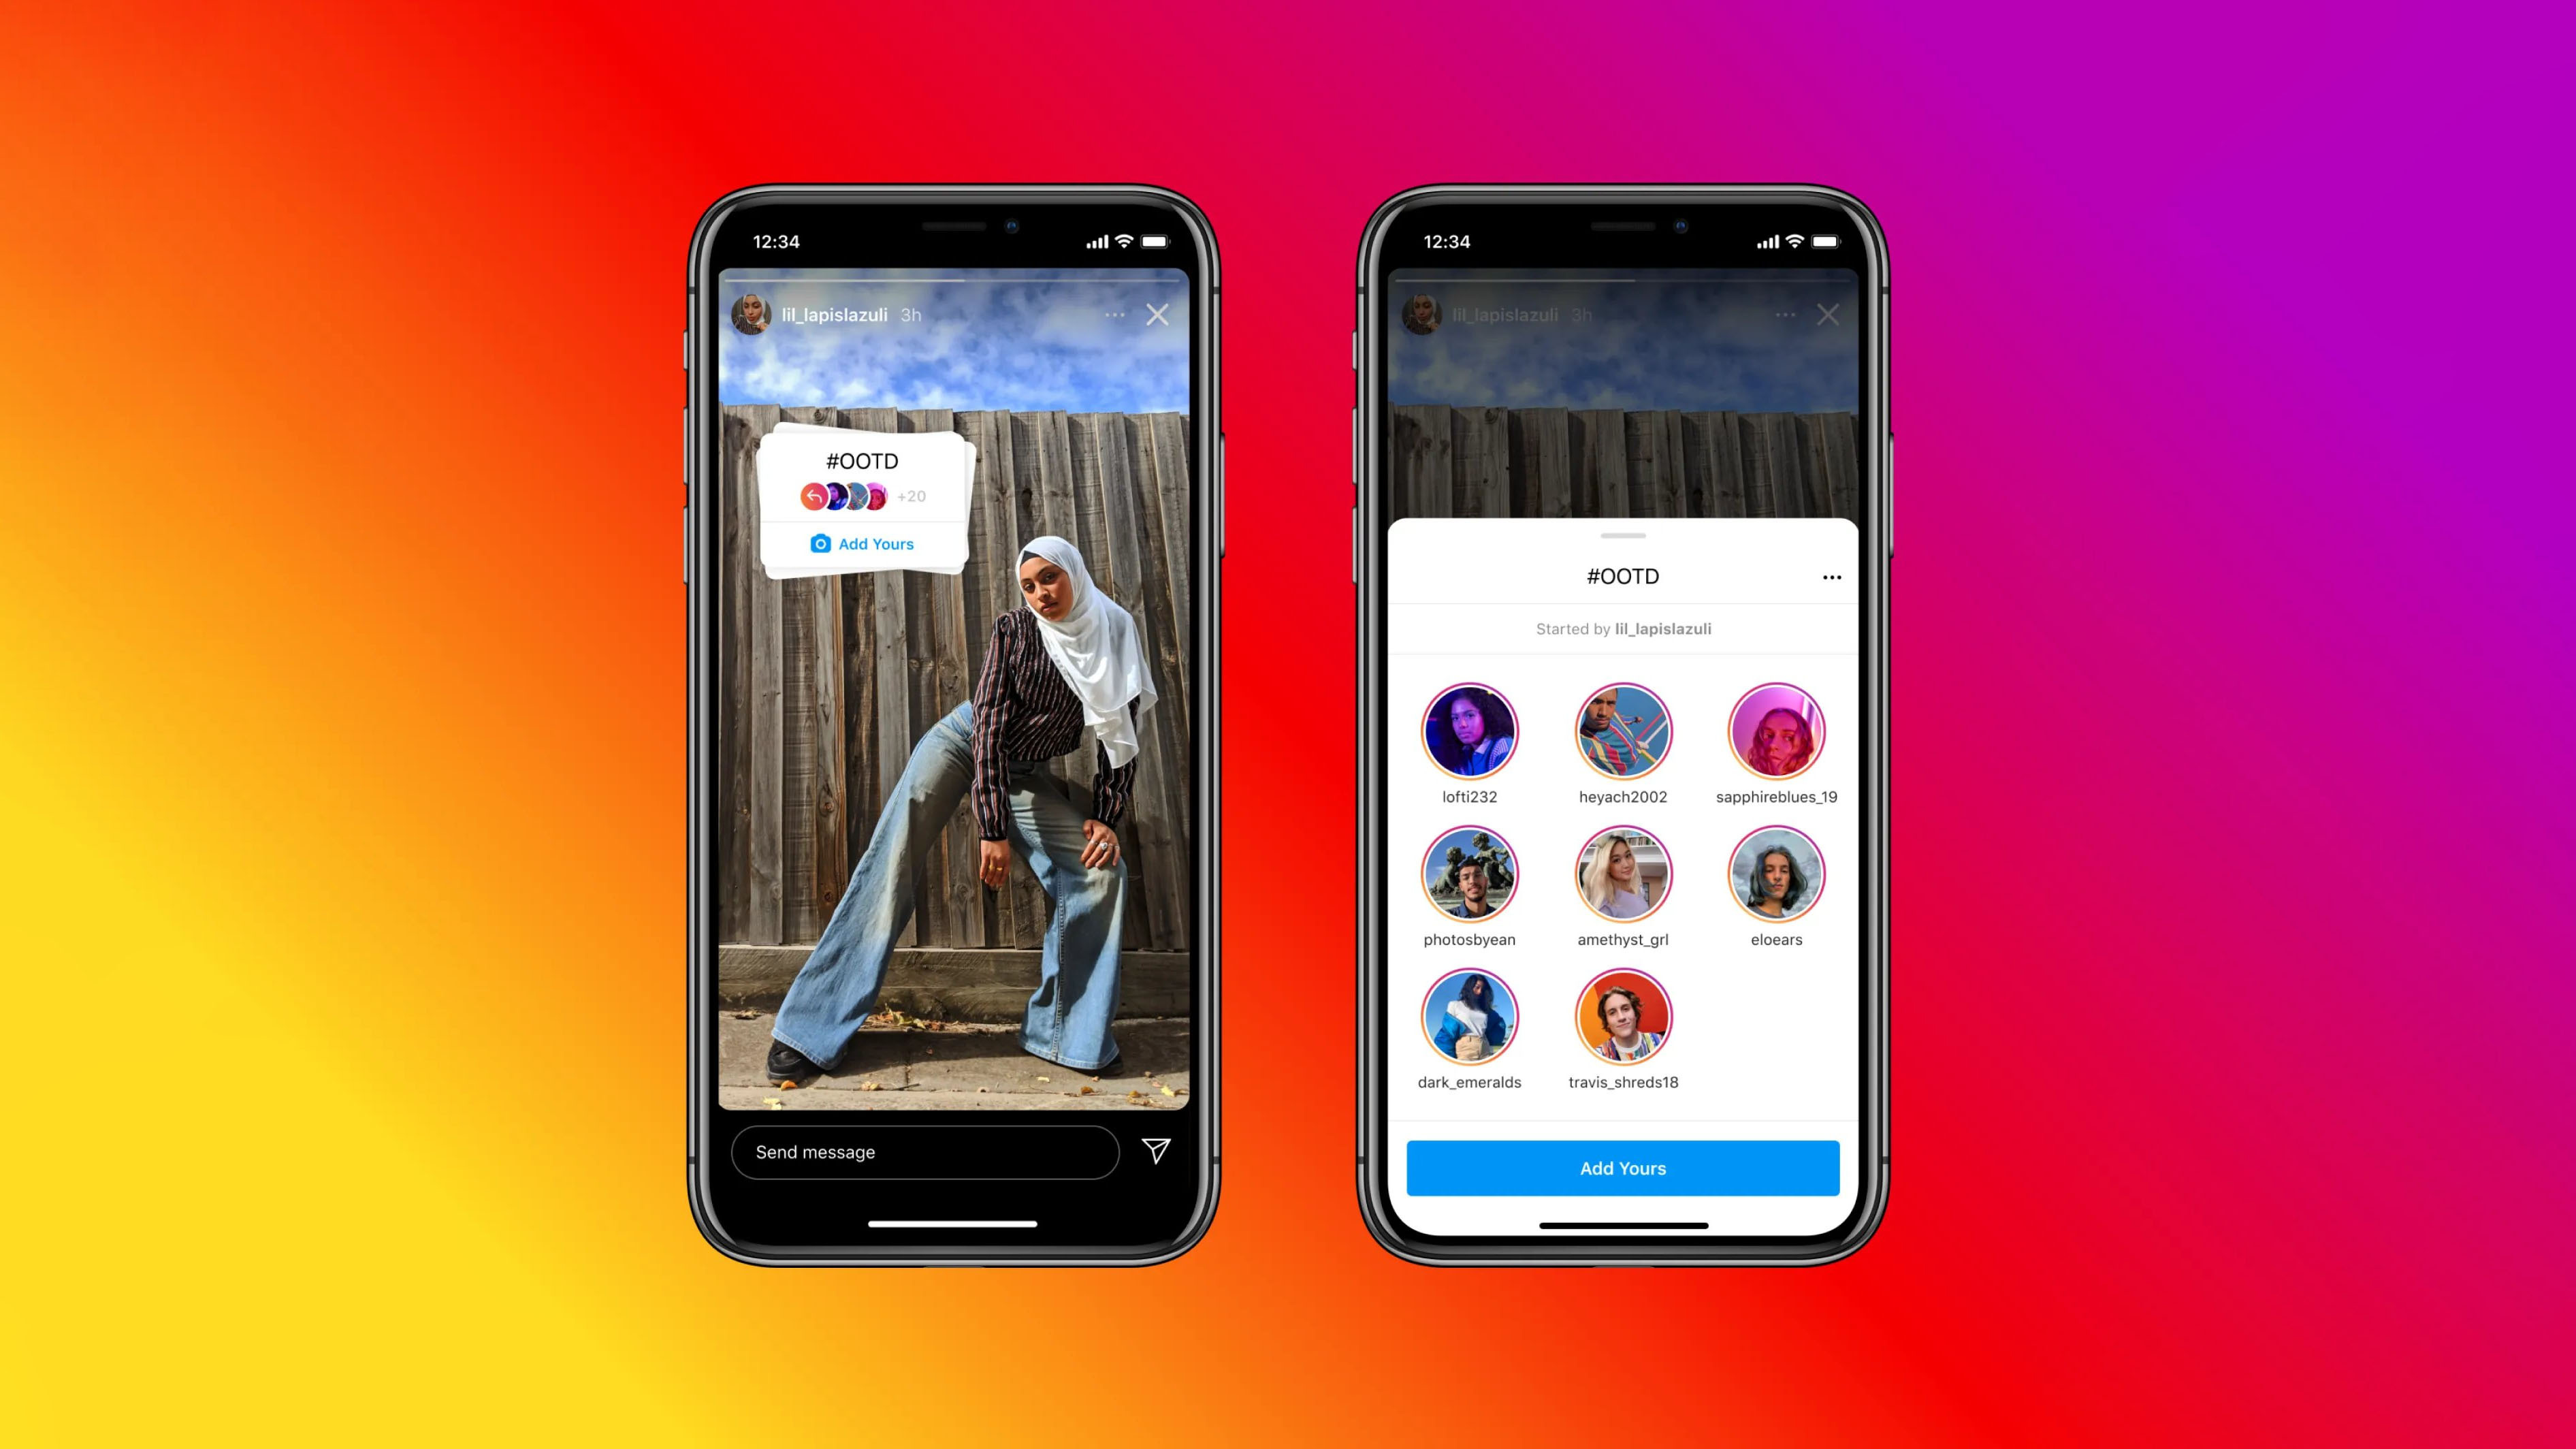 Instagrams New Add Yours Stories Sticker Wants To Encourage Public Discussions Techradar 5960